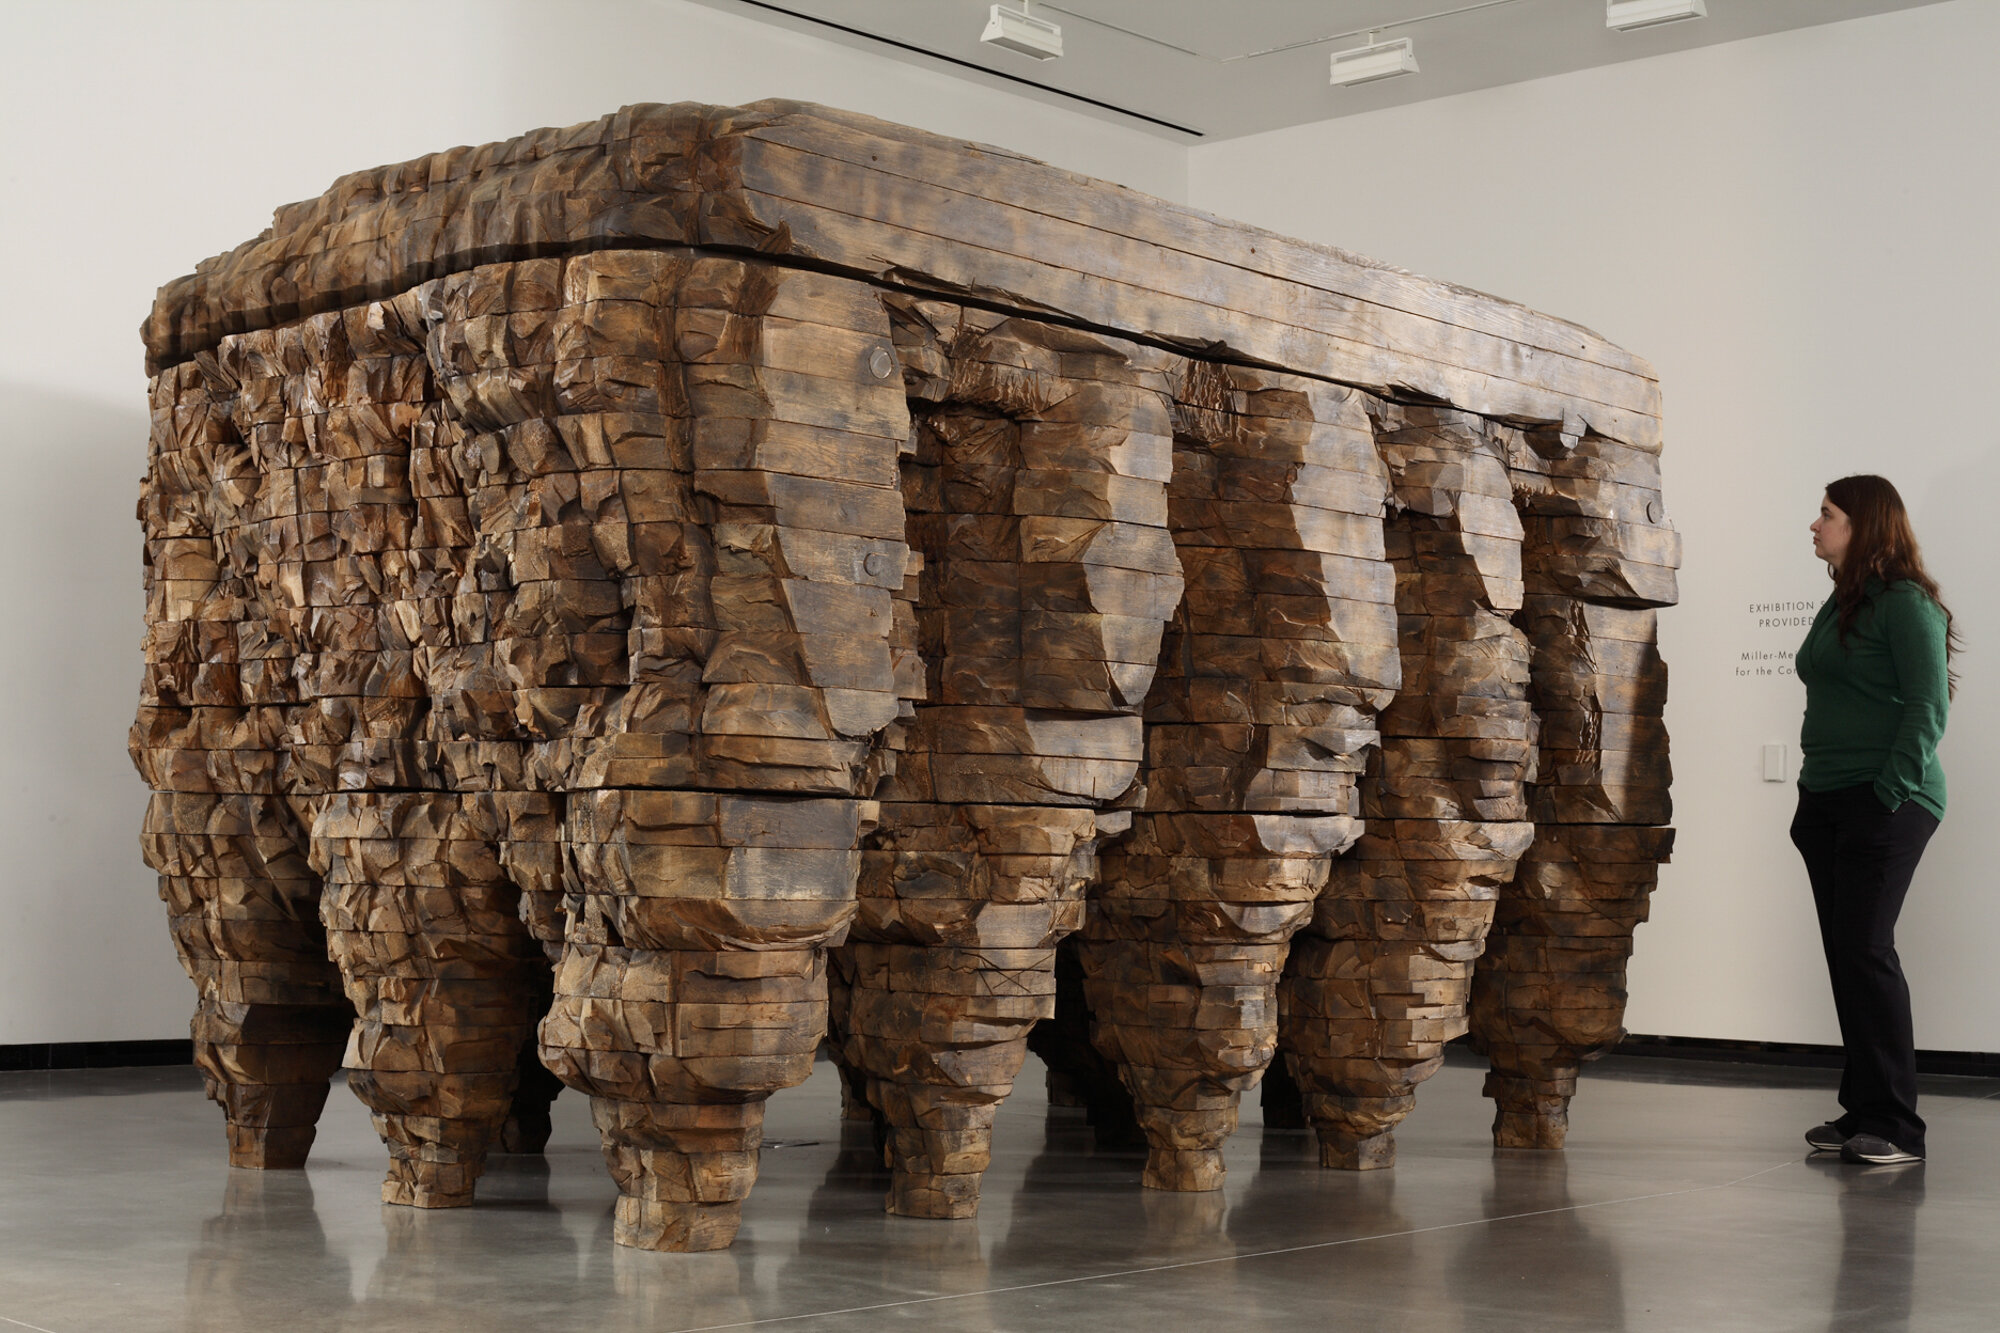       pod pacha , 2003 Cedar, graphite, and motor 80 x 89 x 140 in.    MORE IMAGES   Portland Art Museum   Galerie Lelong &amp; Co.  